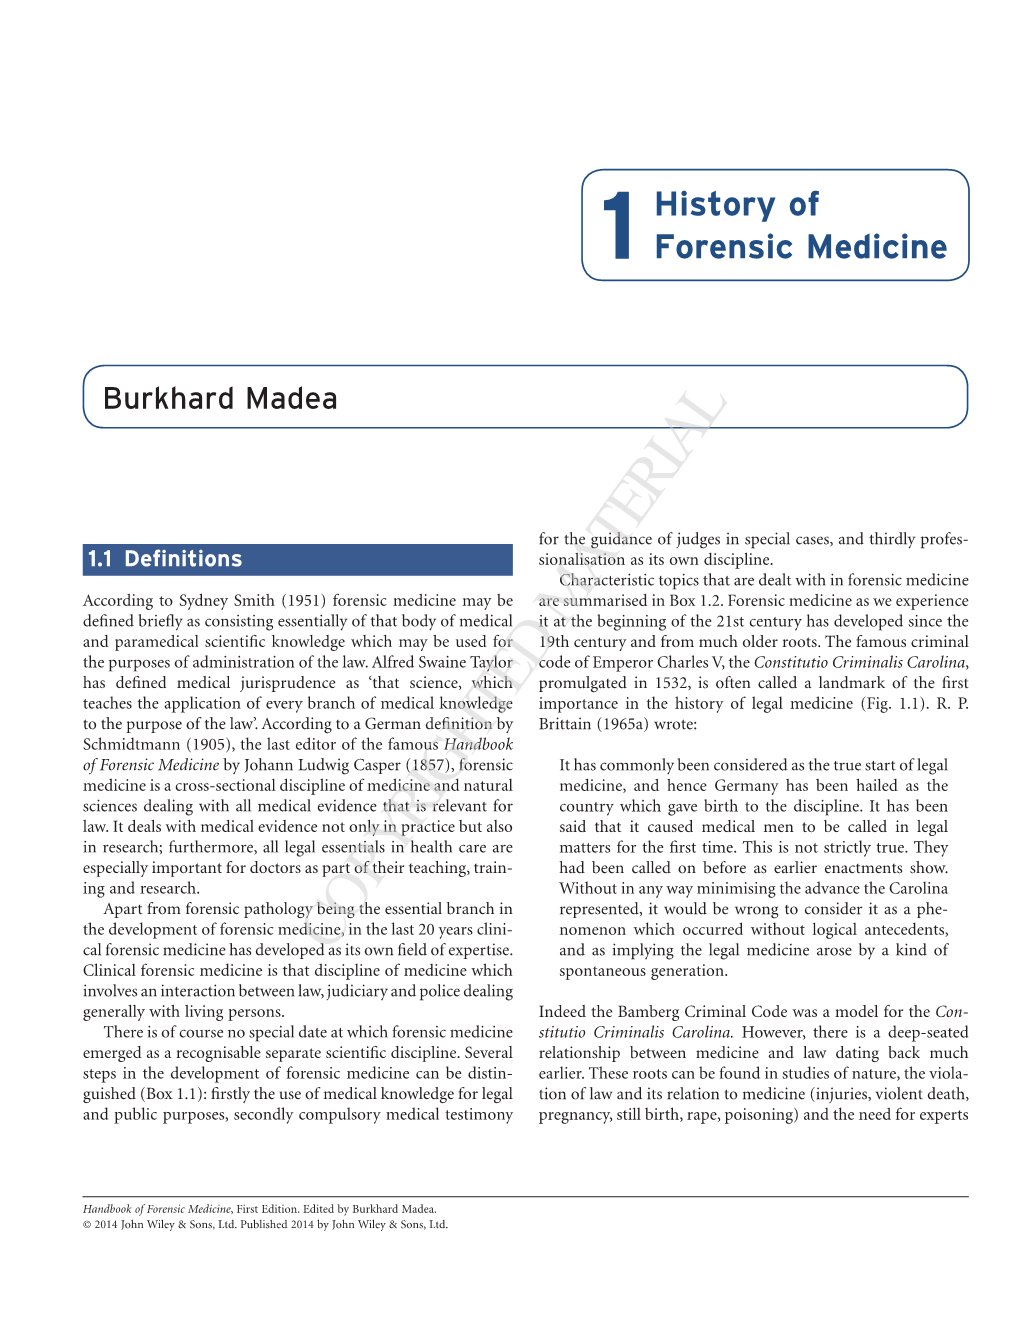 1History of Forensic Medicine